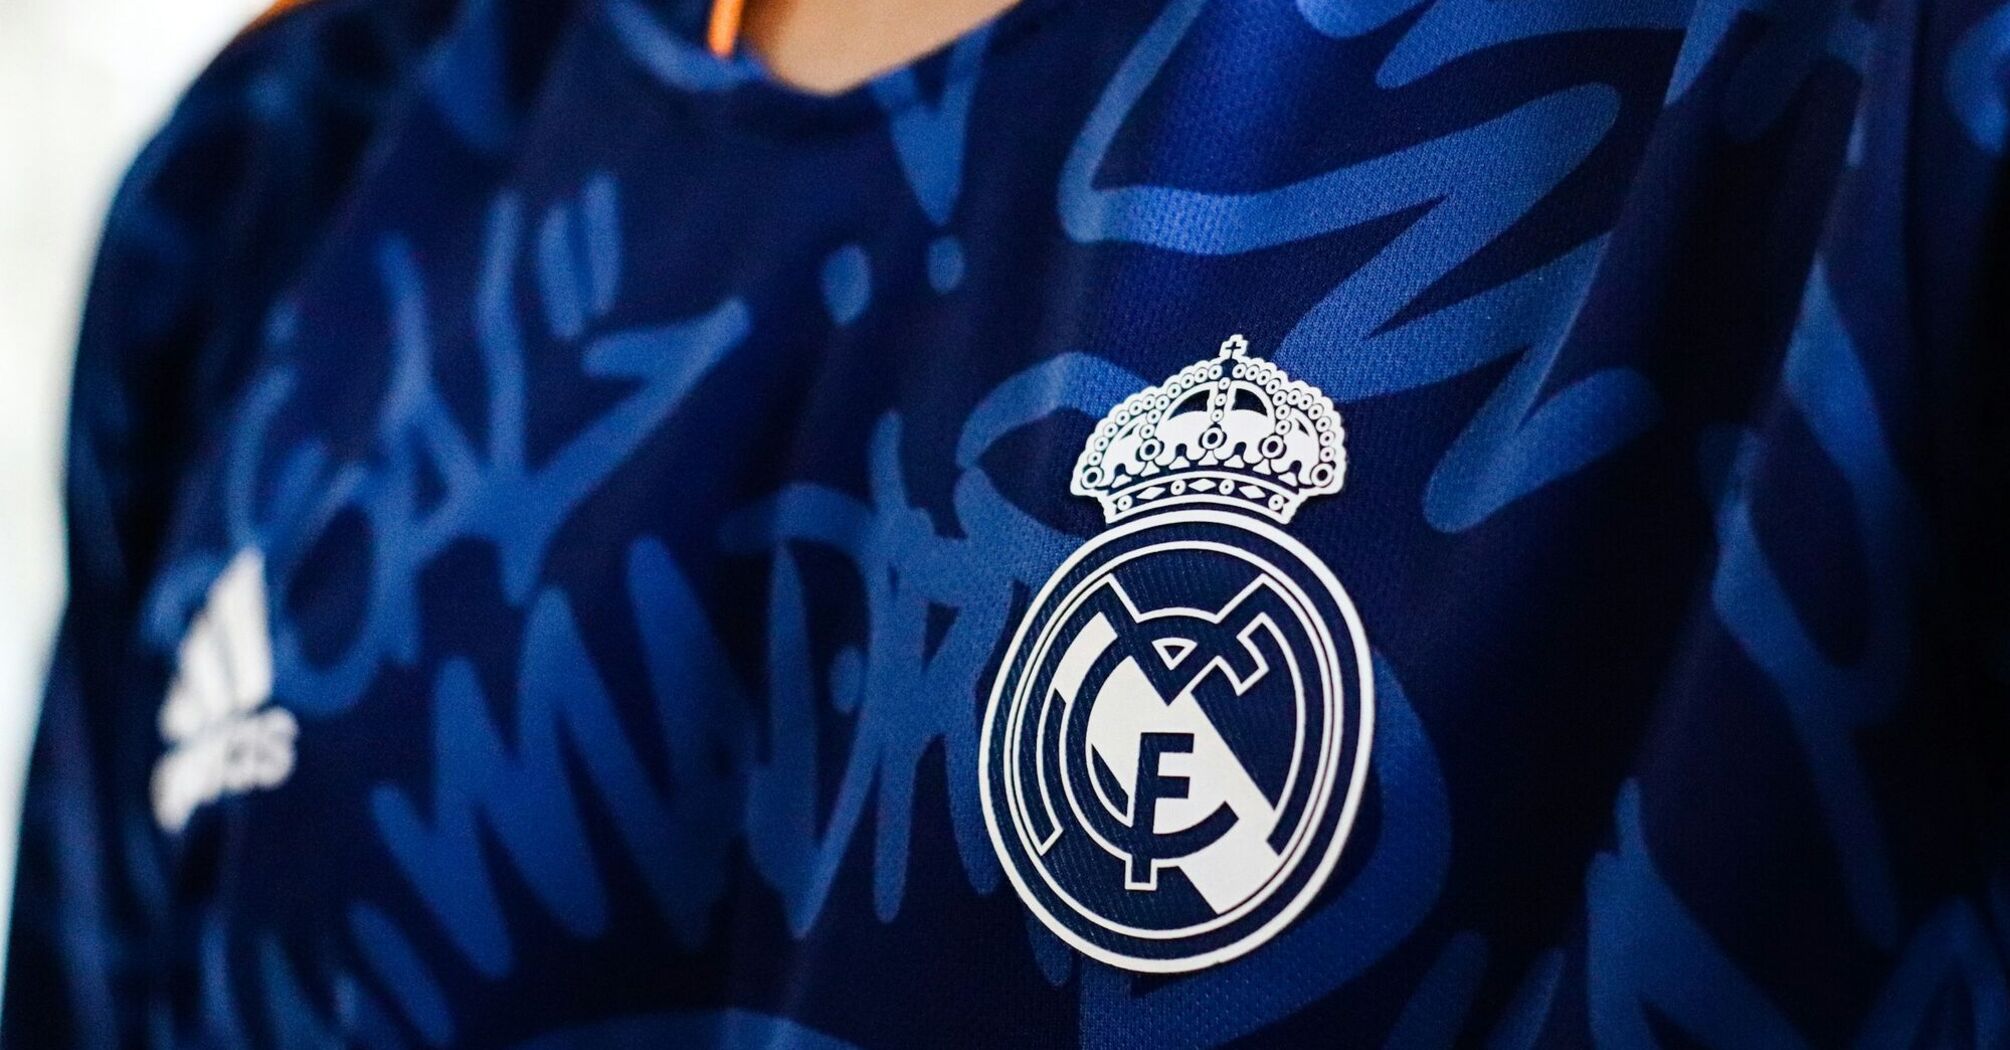 A close up of the Real Madrid soccer jersey